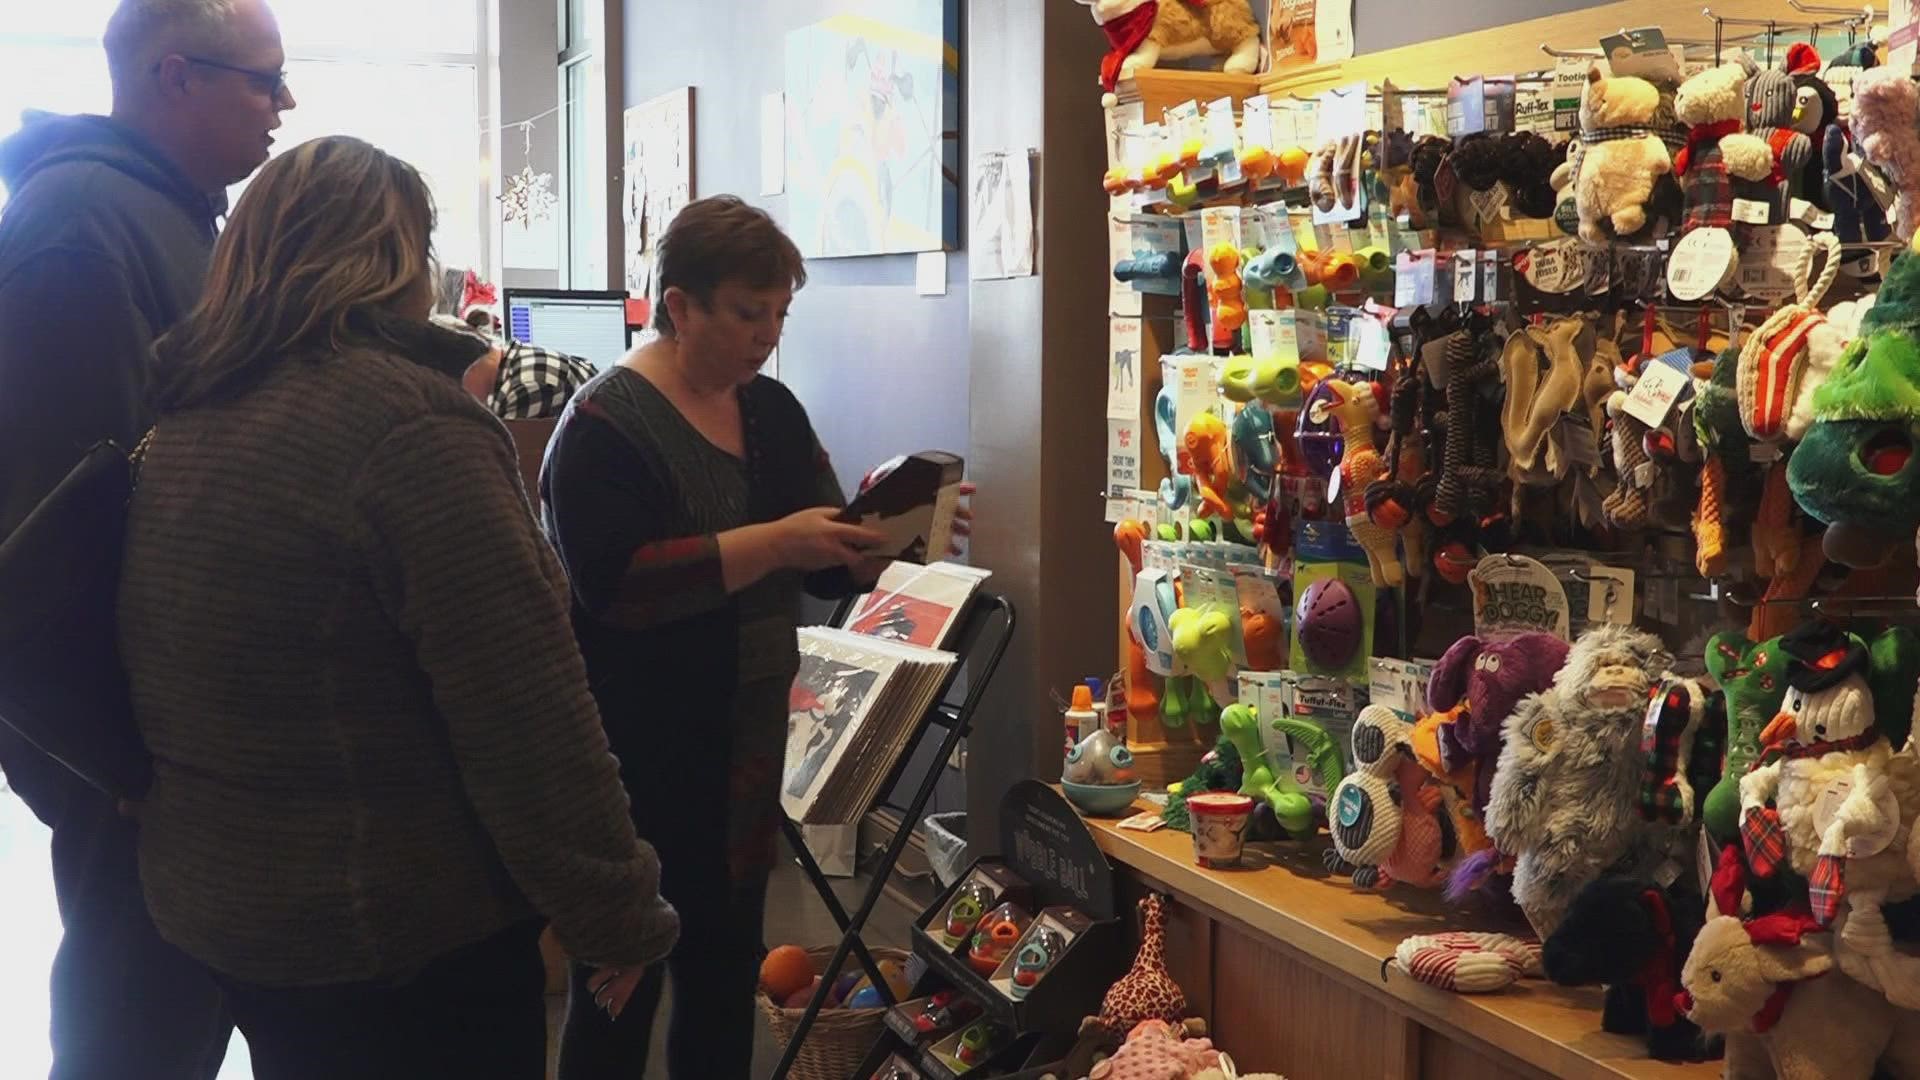 Small Business Saturday comes after Black Friday and is meant to celebrate small businesses across the community.